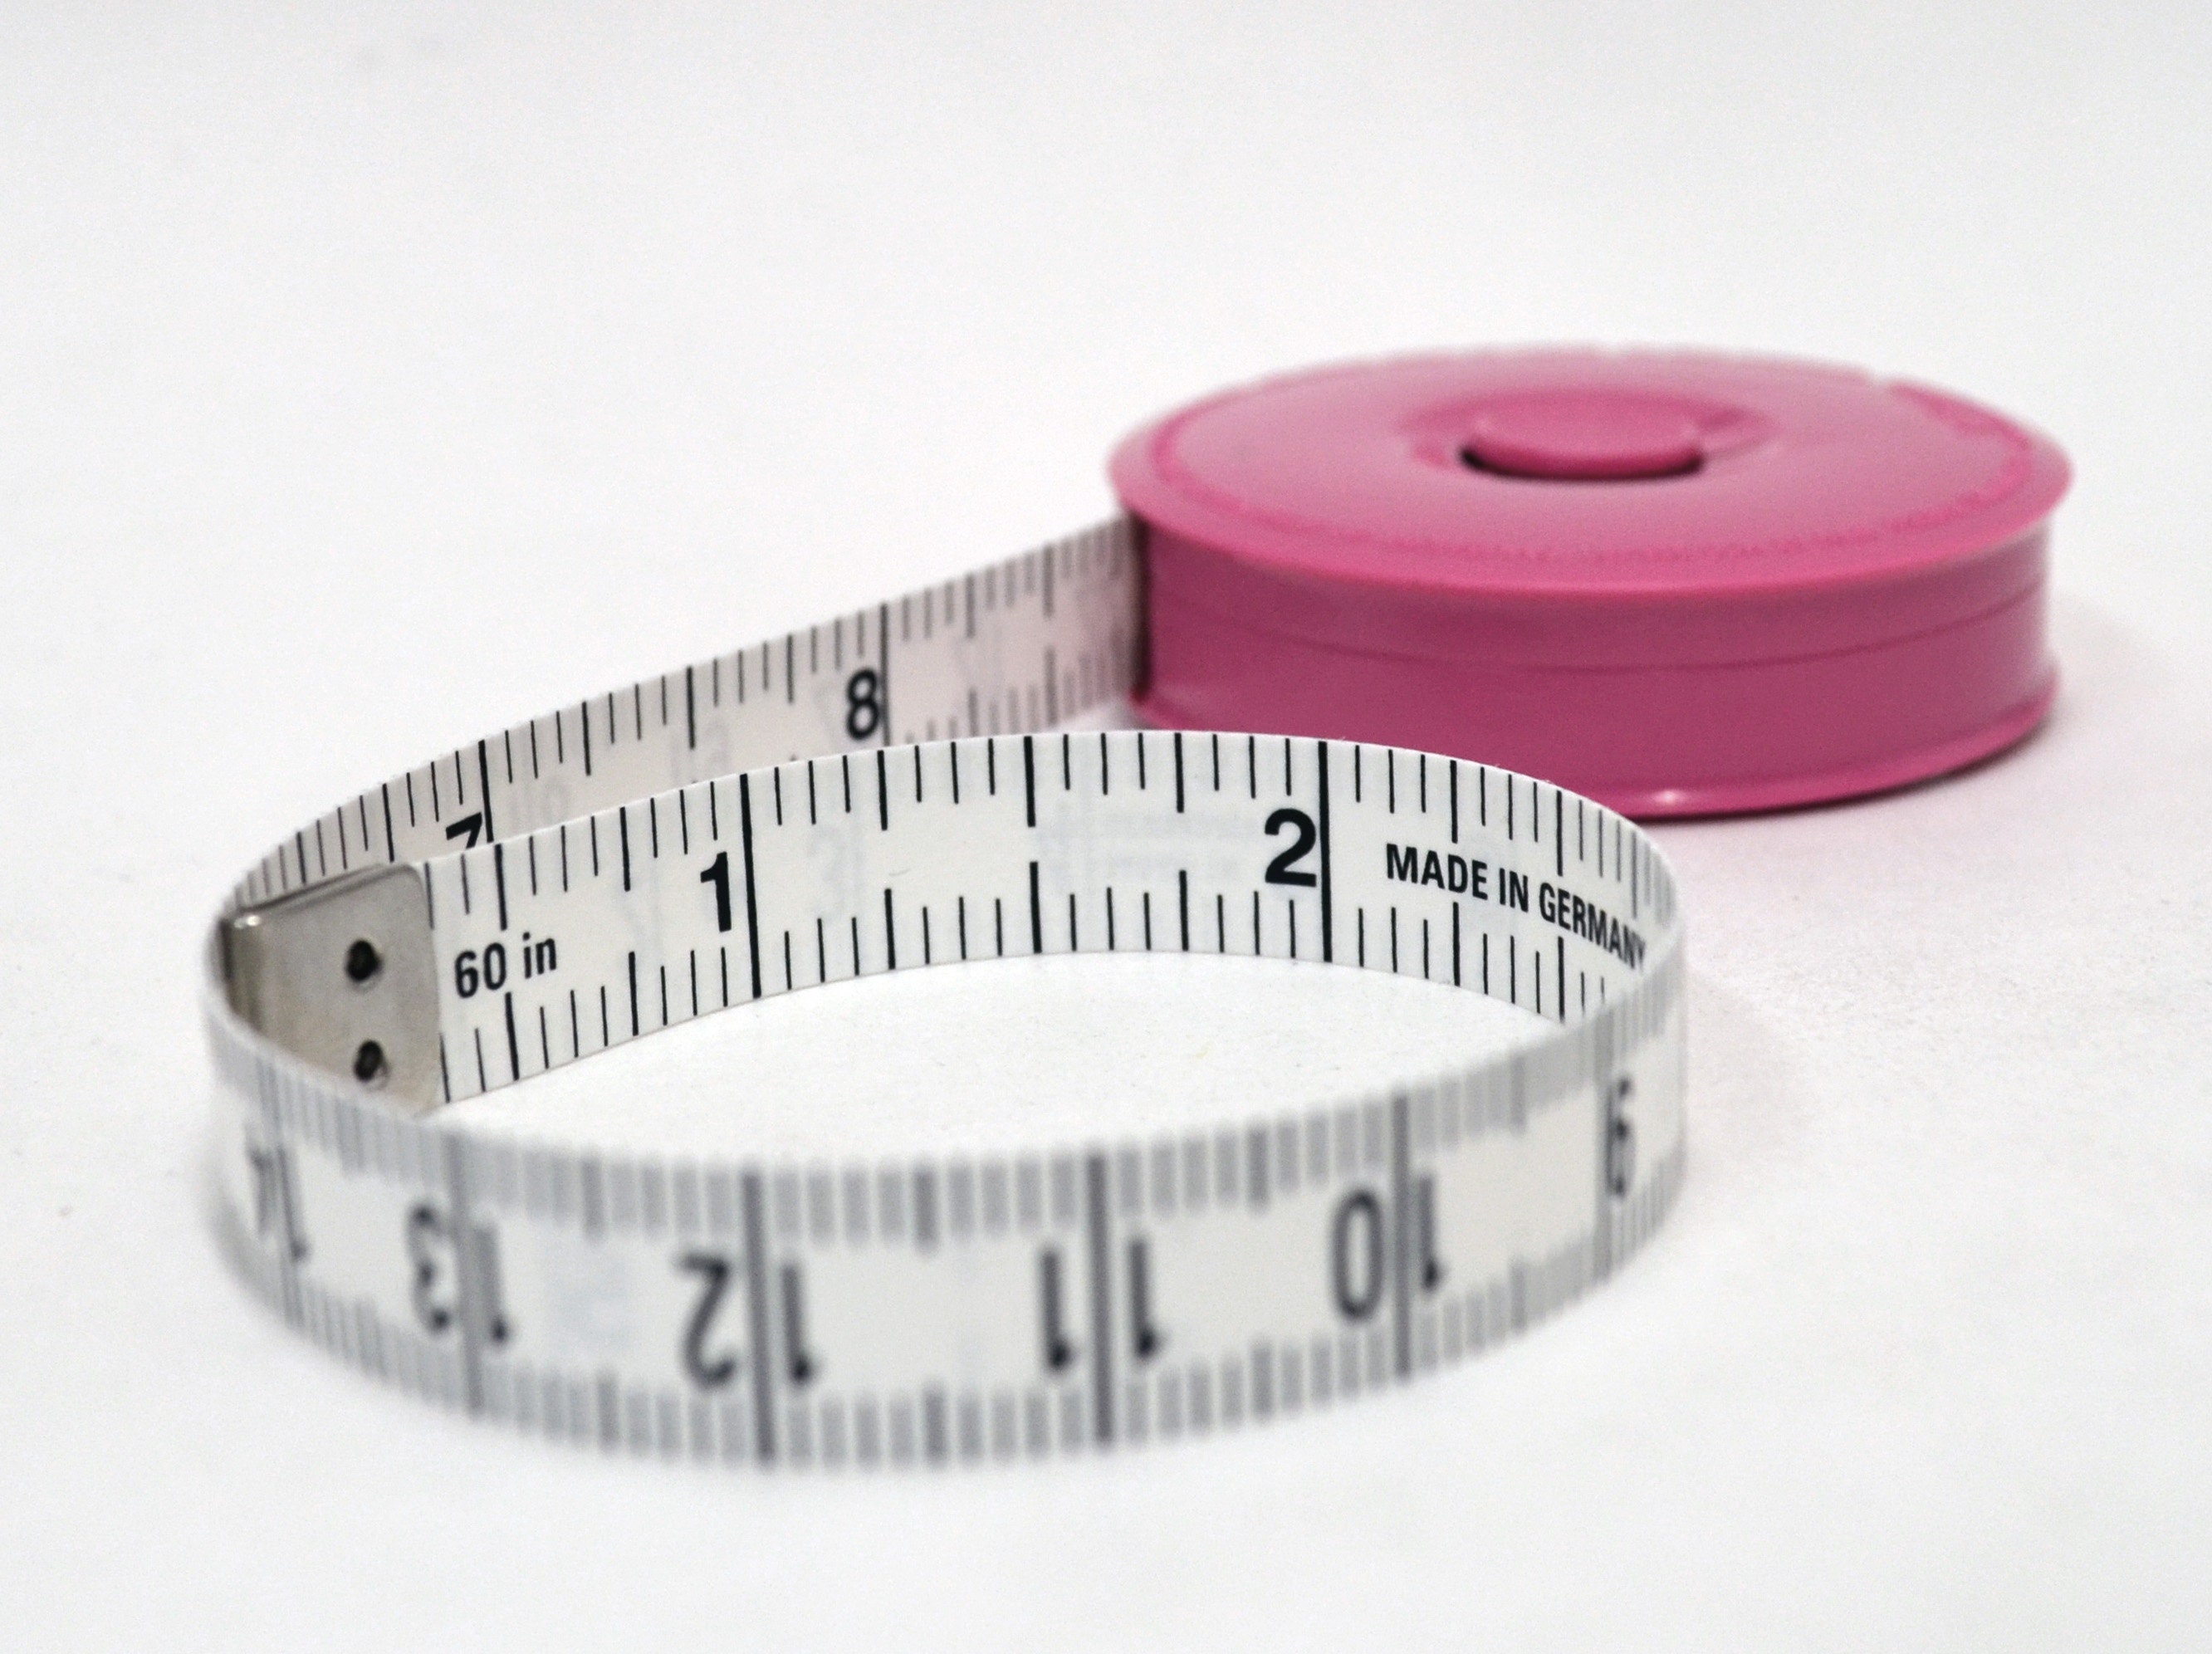 Sturdy Retractable Tape Measures, 60, Made in Germany